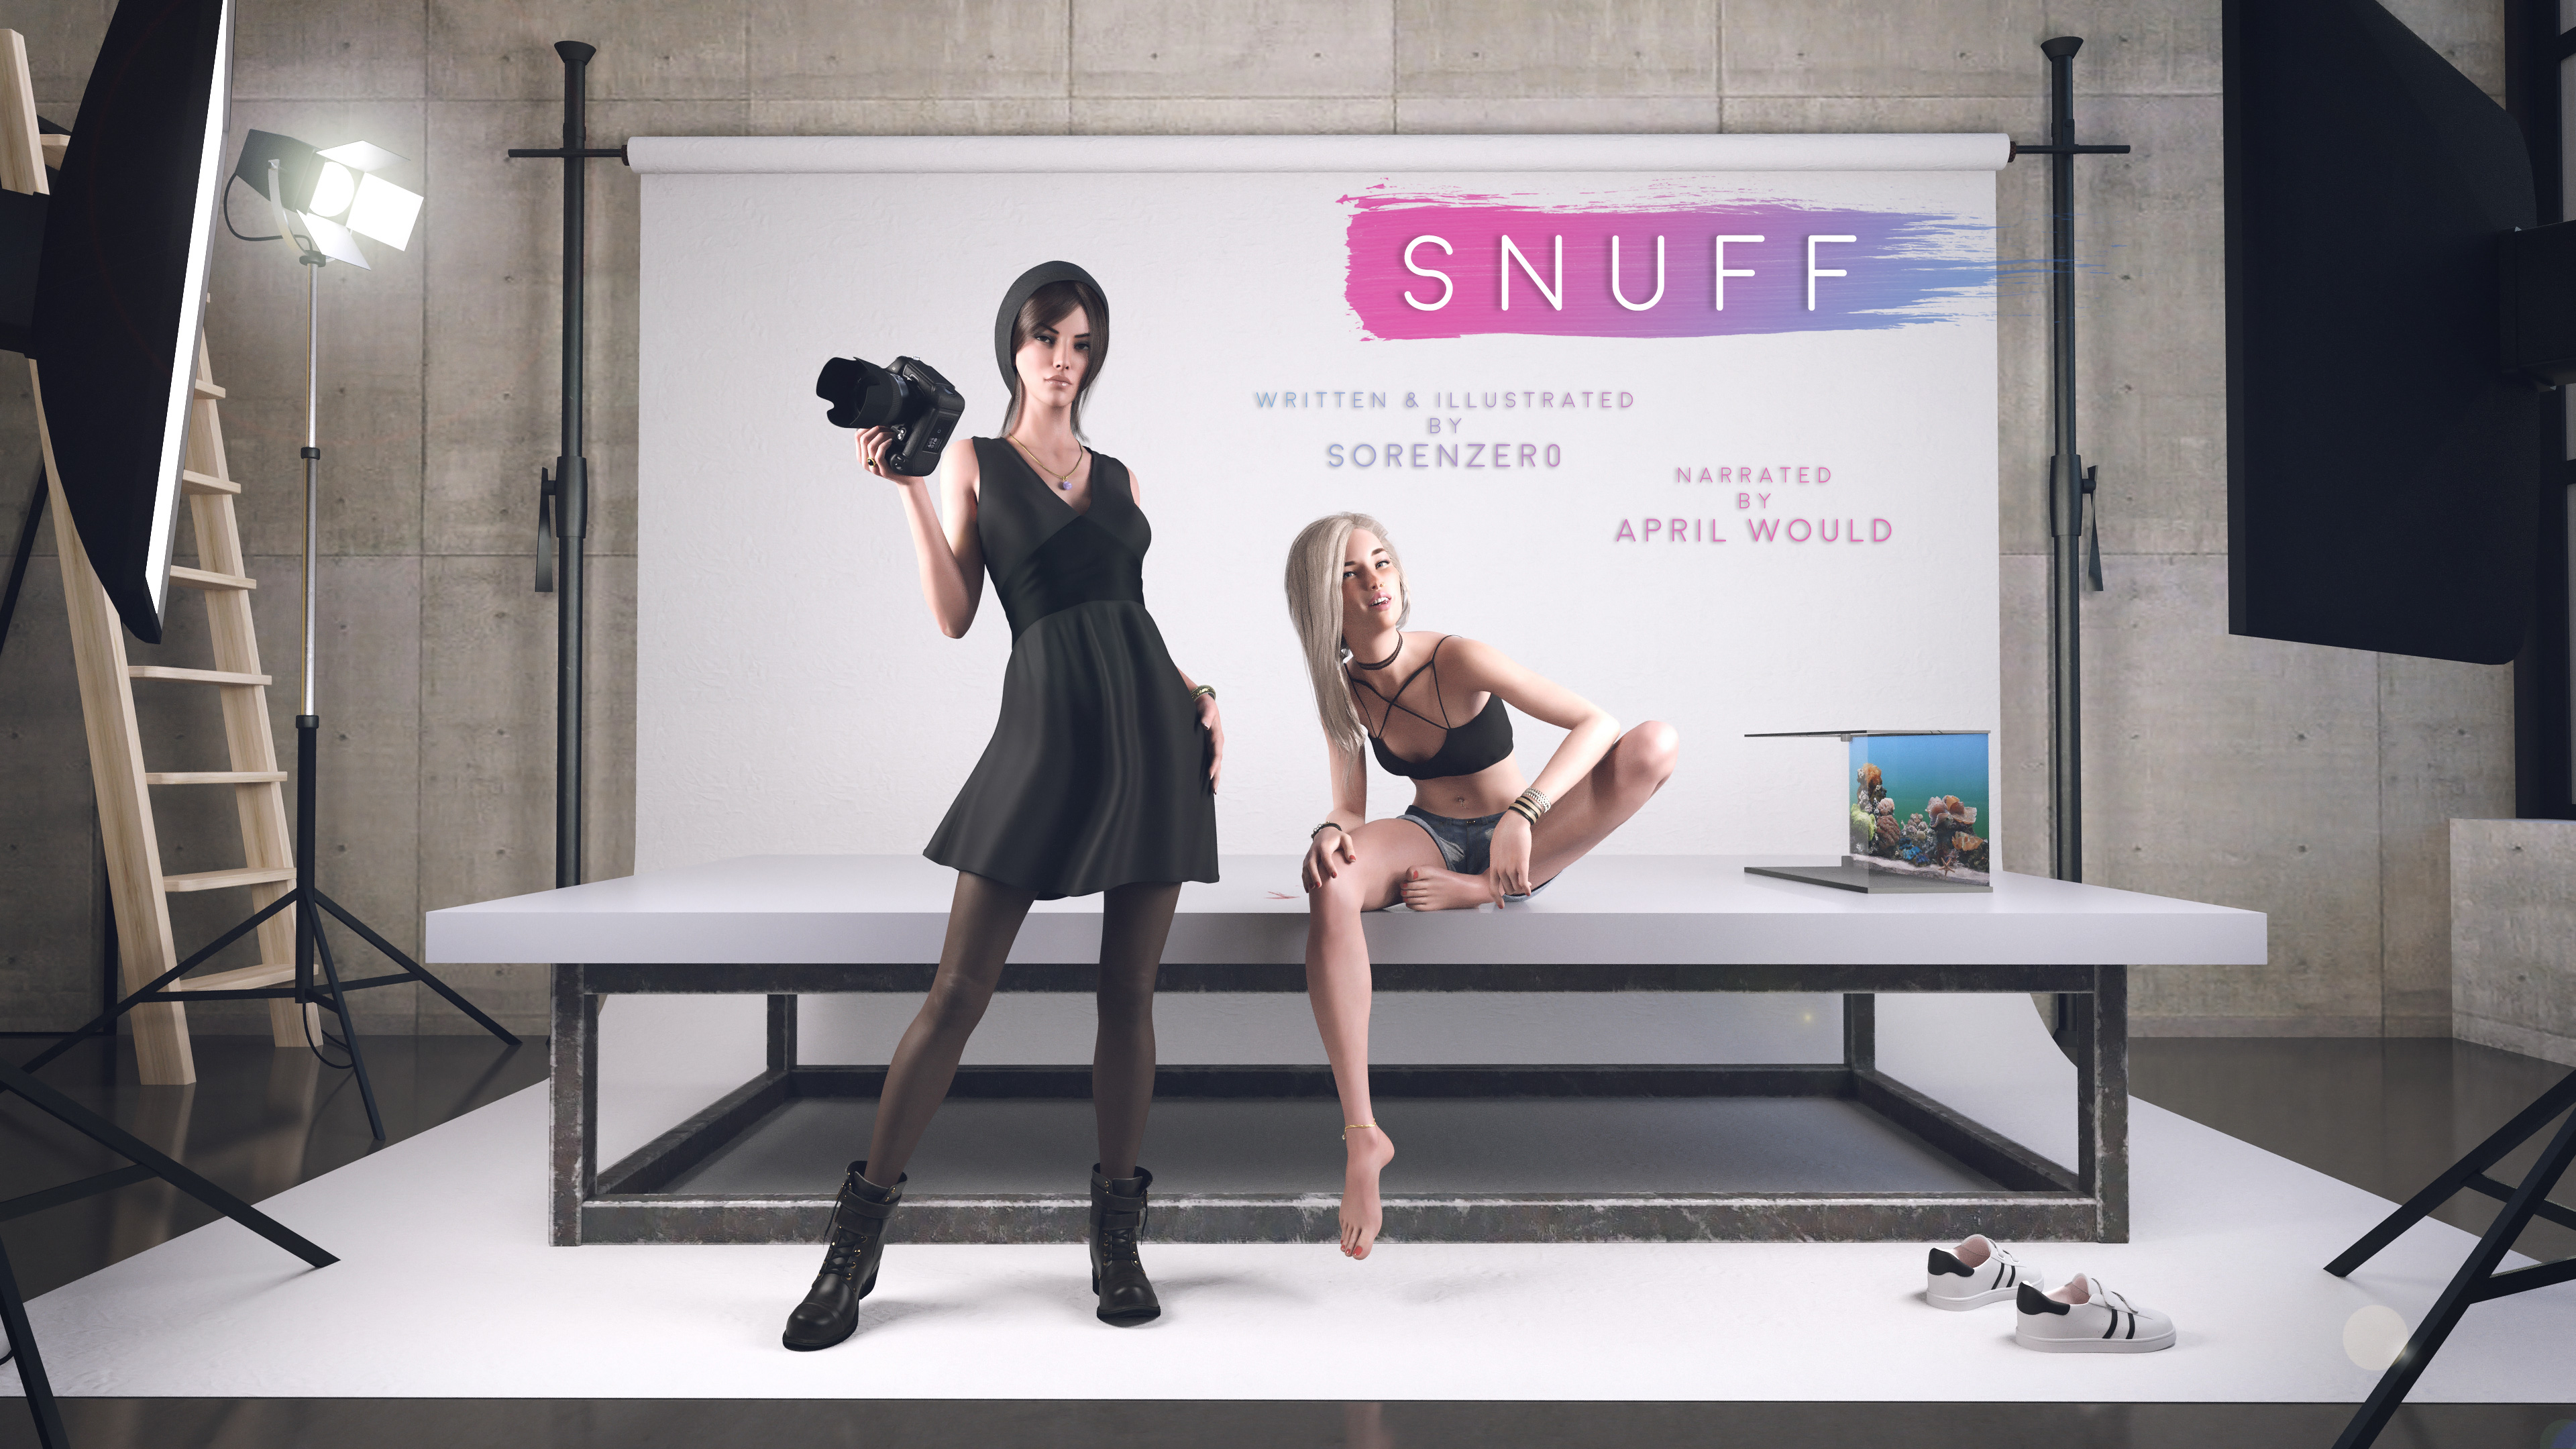 snuff now available by sorenzer 0 dc 4 m 2 b 6